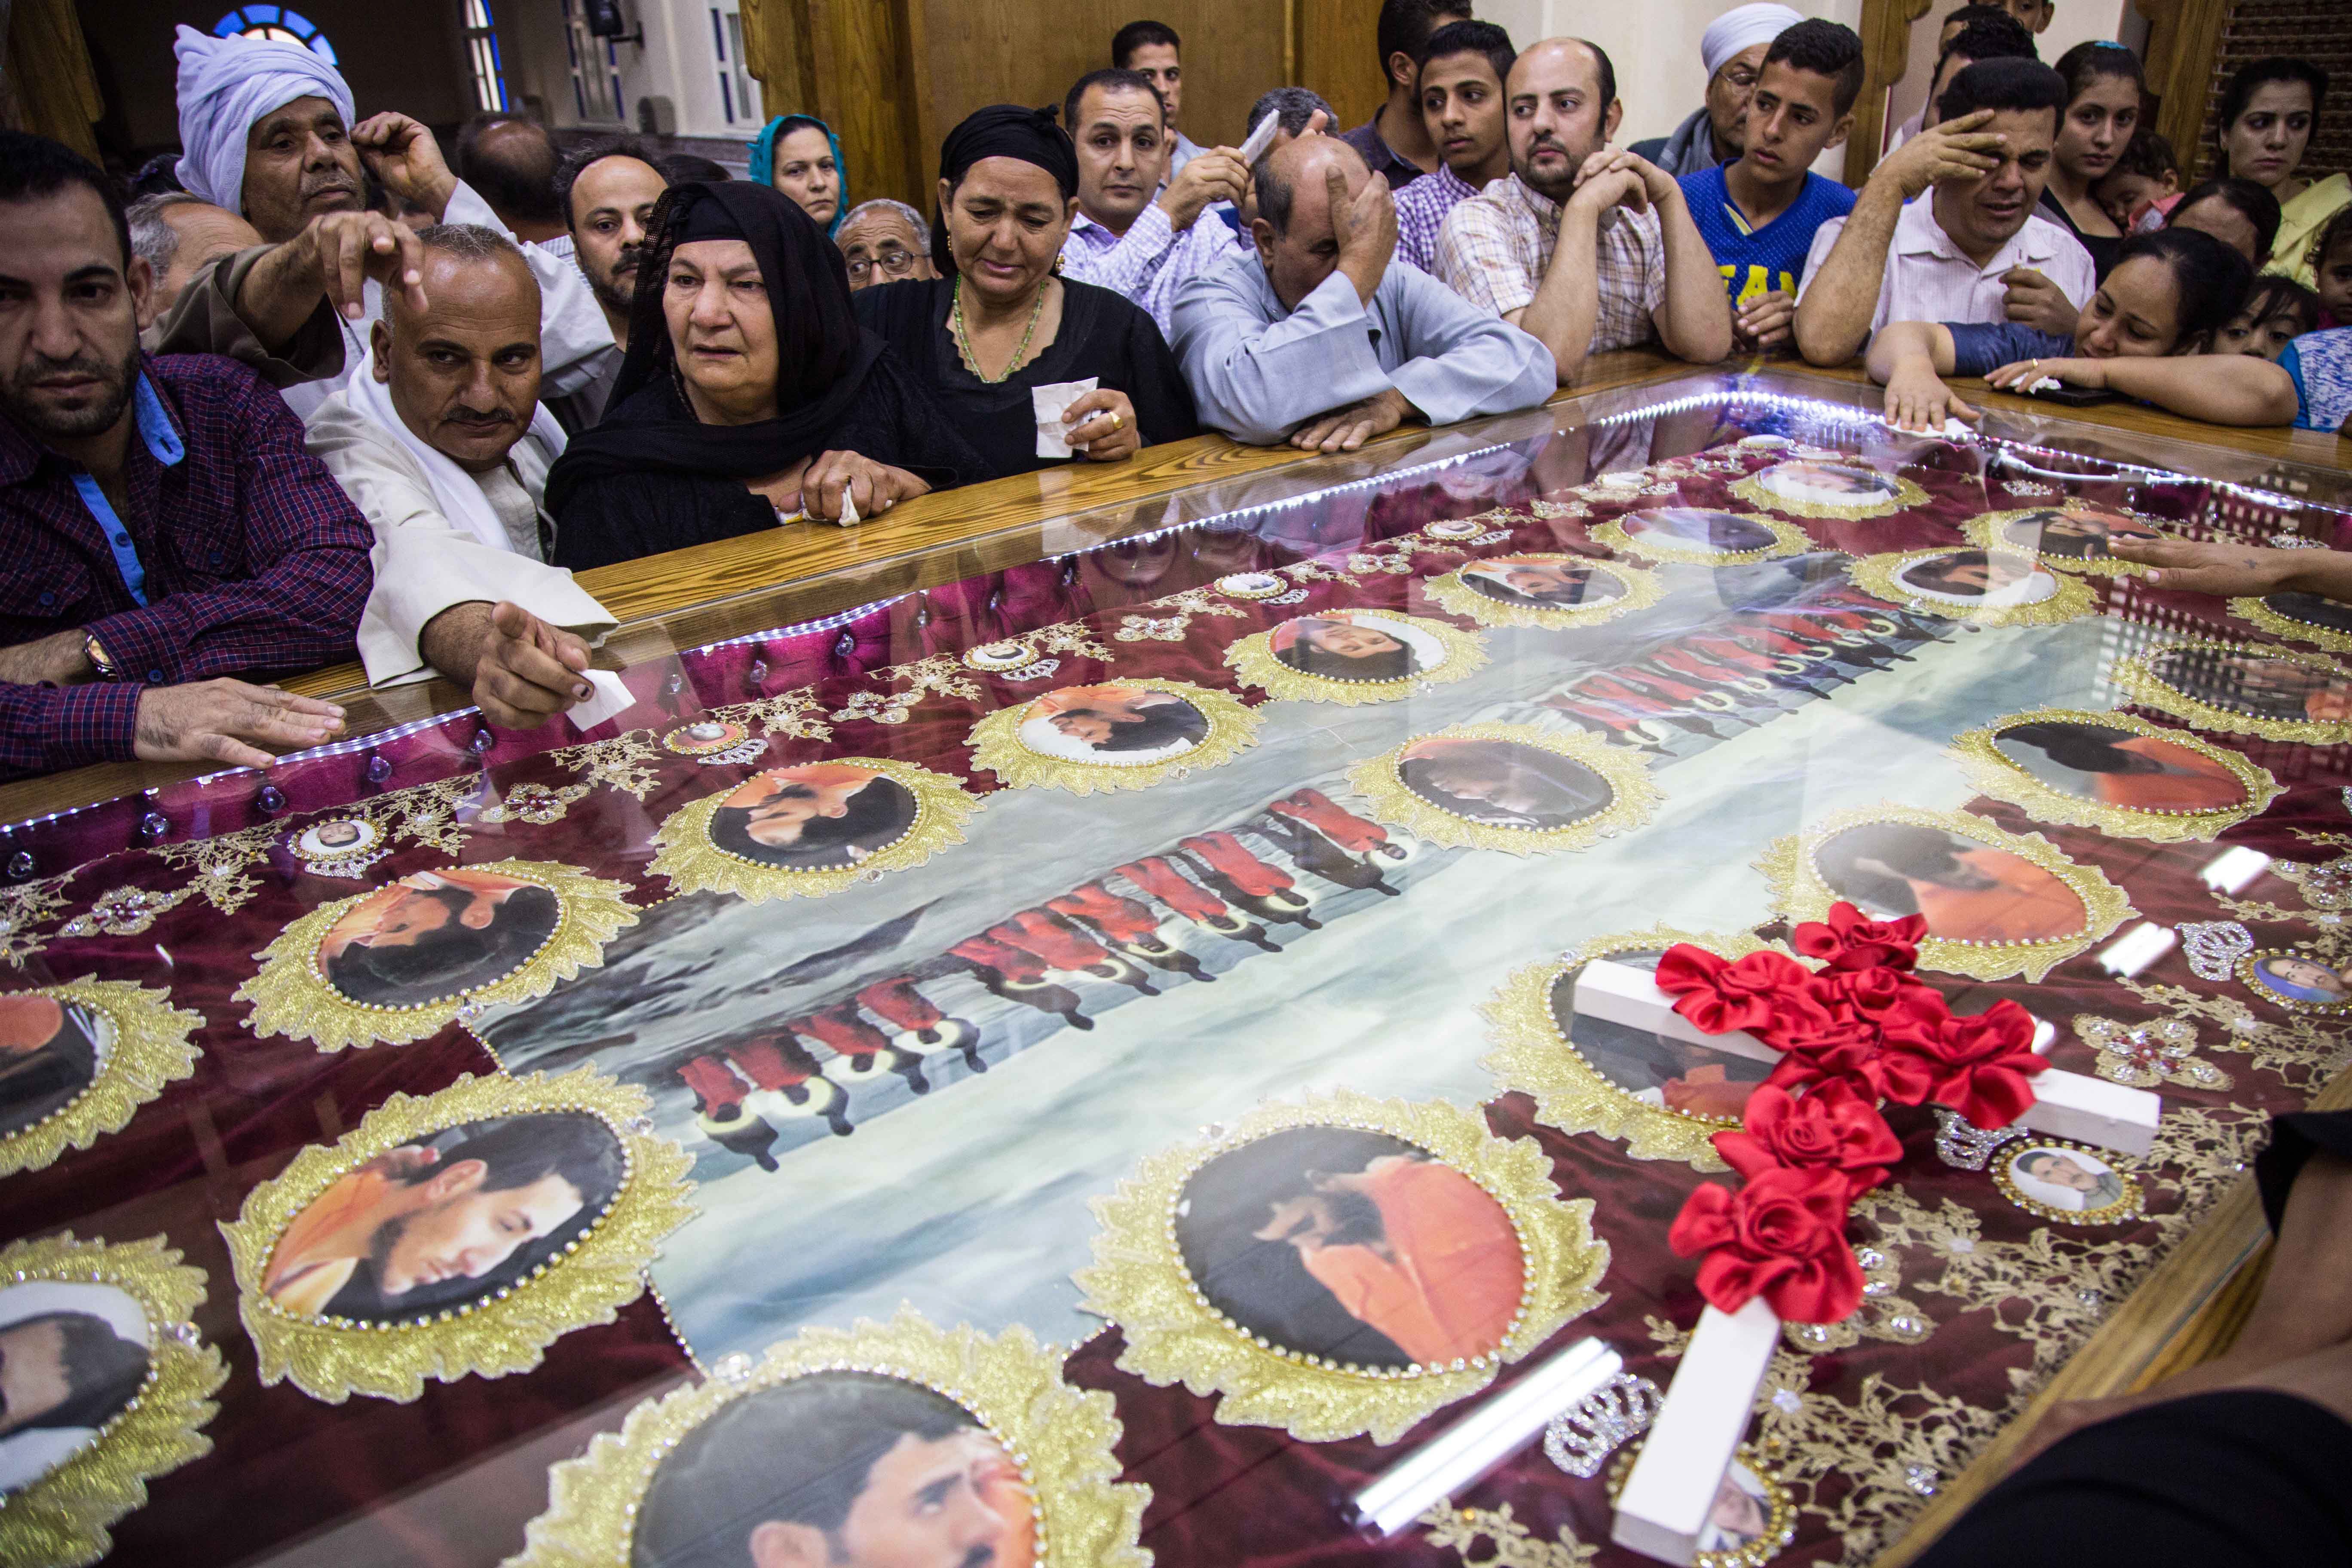 Relatives pray and mourn over the repatriated remains of 20 Egyptian Coptic Orthodox Christian men who were beheaded by jihadists on the beach of the Libyan city of Sirte in Libya in 2015, during their funeral ceremony at the Church of the Martyrs in the village of Al-Our in Egypt's southern Minya province on May 15, 2018. - The remains arrived home on May 15, 2018, an official at Cairo airport said, after being flown in from Misrata on a Libyan Afriqiyah Airways cargo plane. The doctor supervising the task of identifying the bodies said it was "not an easy task", as they had decomposed and the heads had been separated from the torsos, having to rely on DNA samples sent by the victims' families. (IBRAHIM EZZAT/AFP/Getty Images)